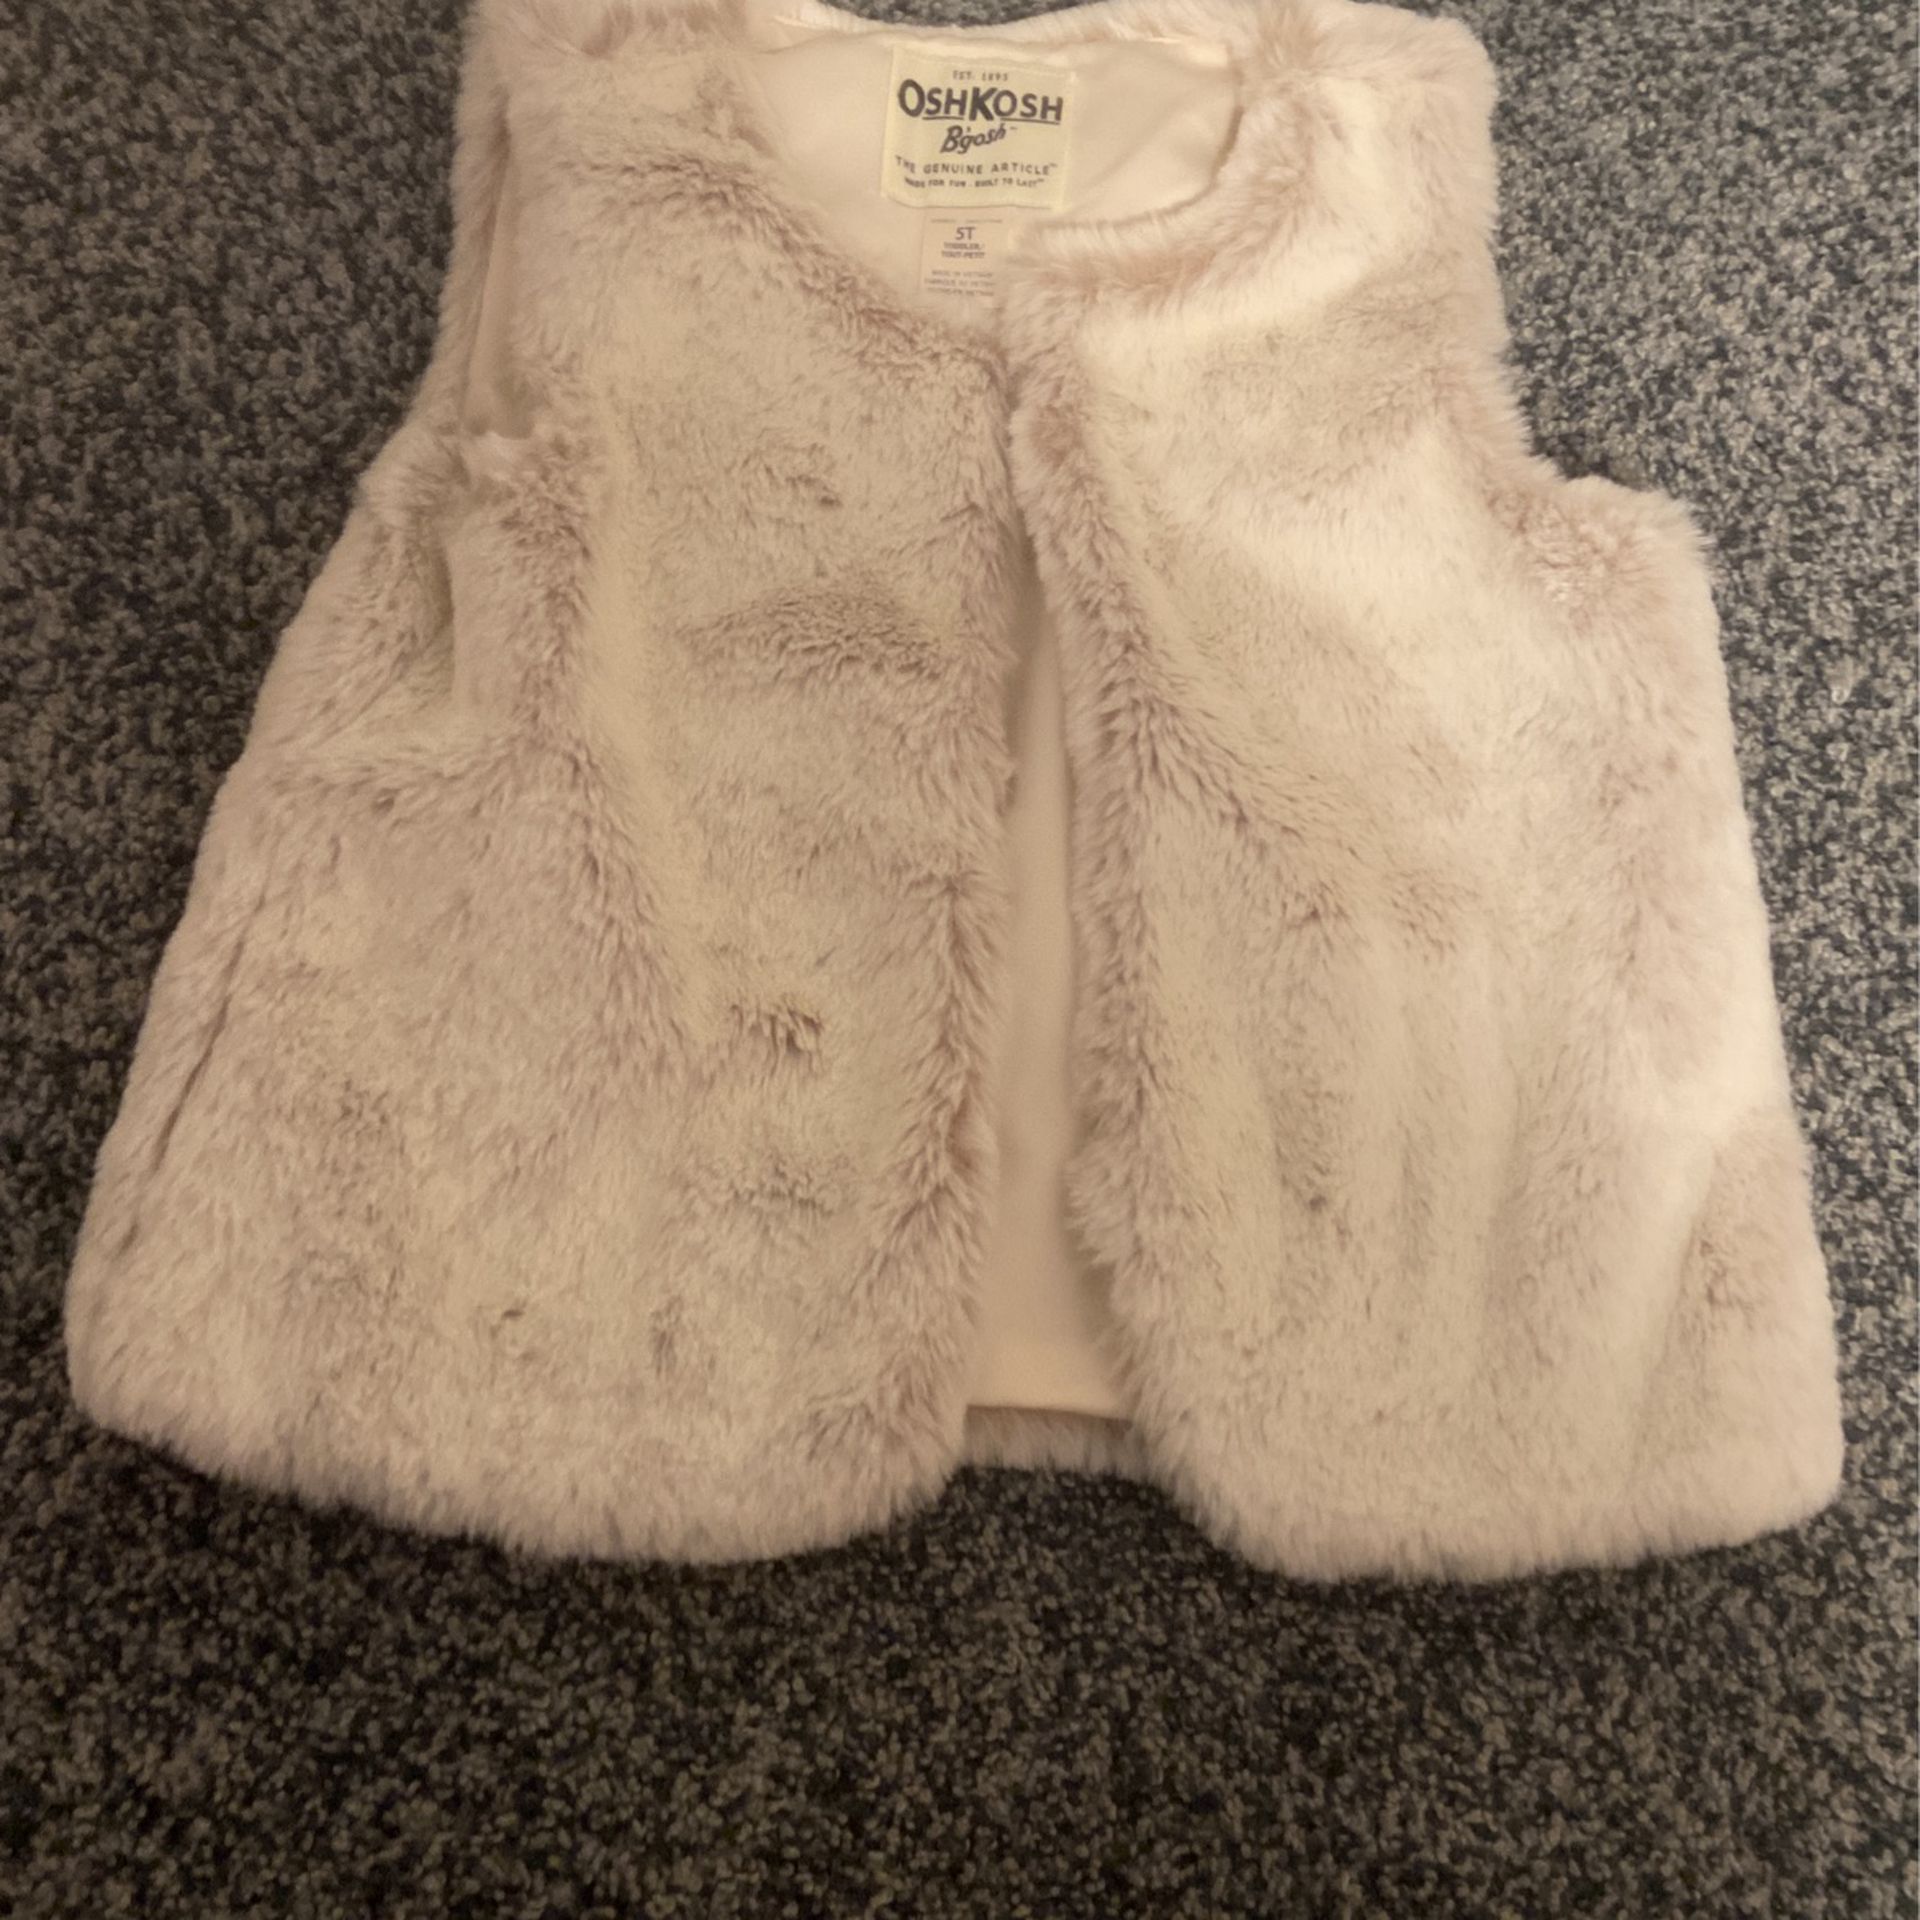 New 5t Fur Vest. Ticket Price 32. See My Page Tons More 